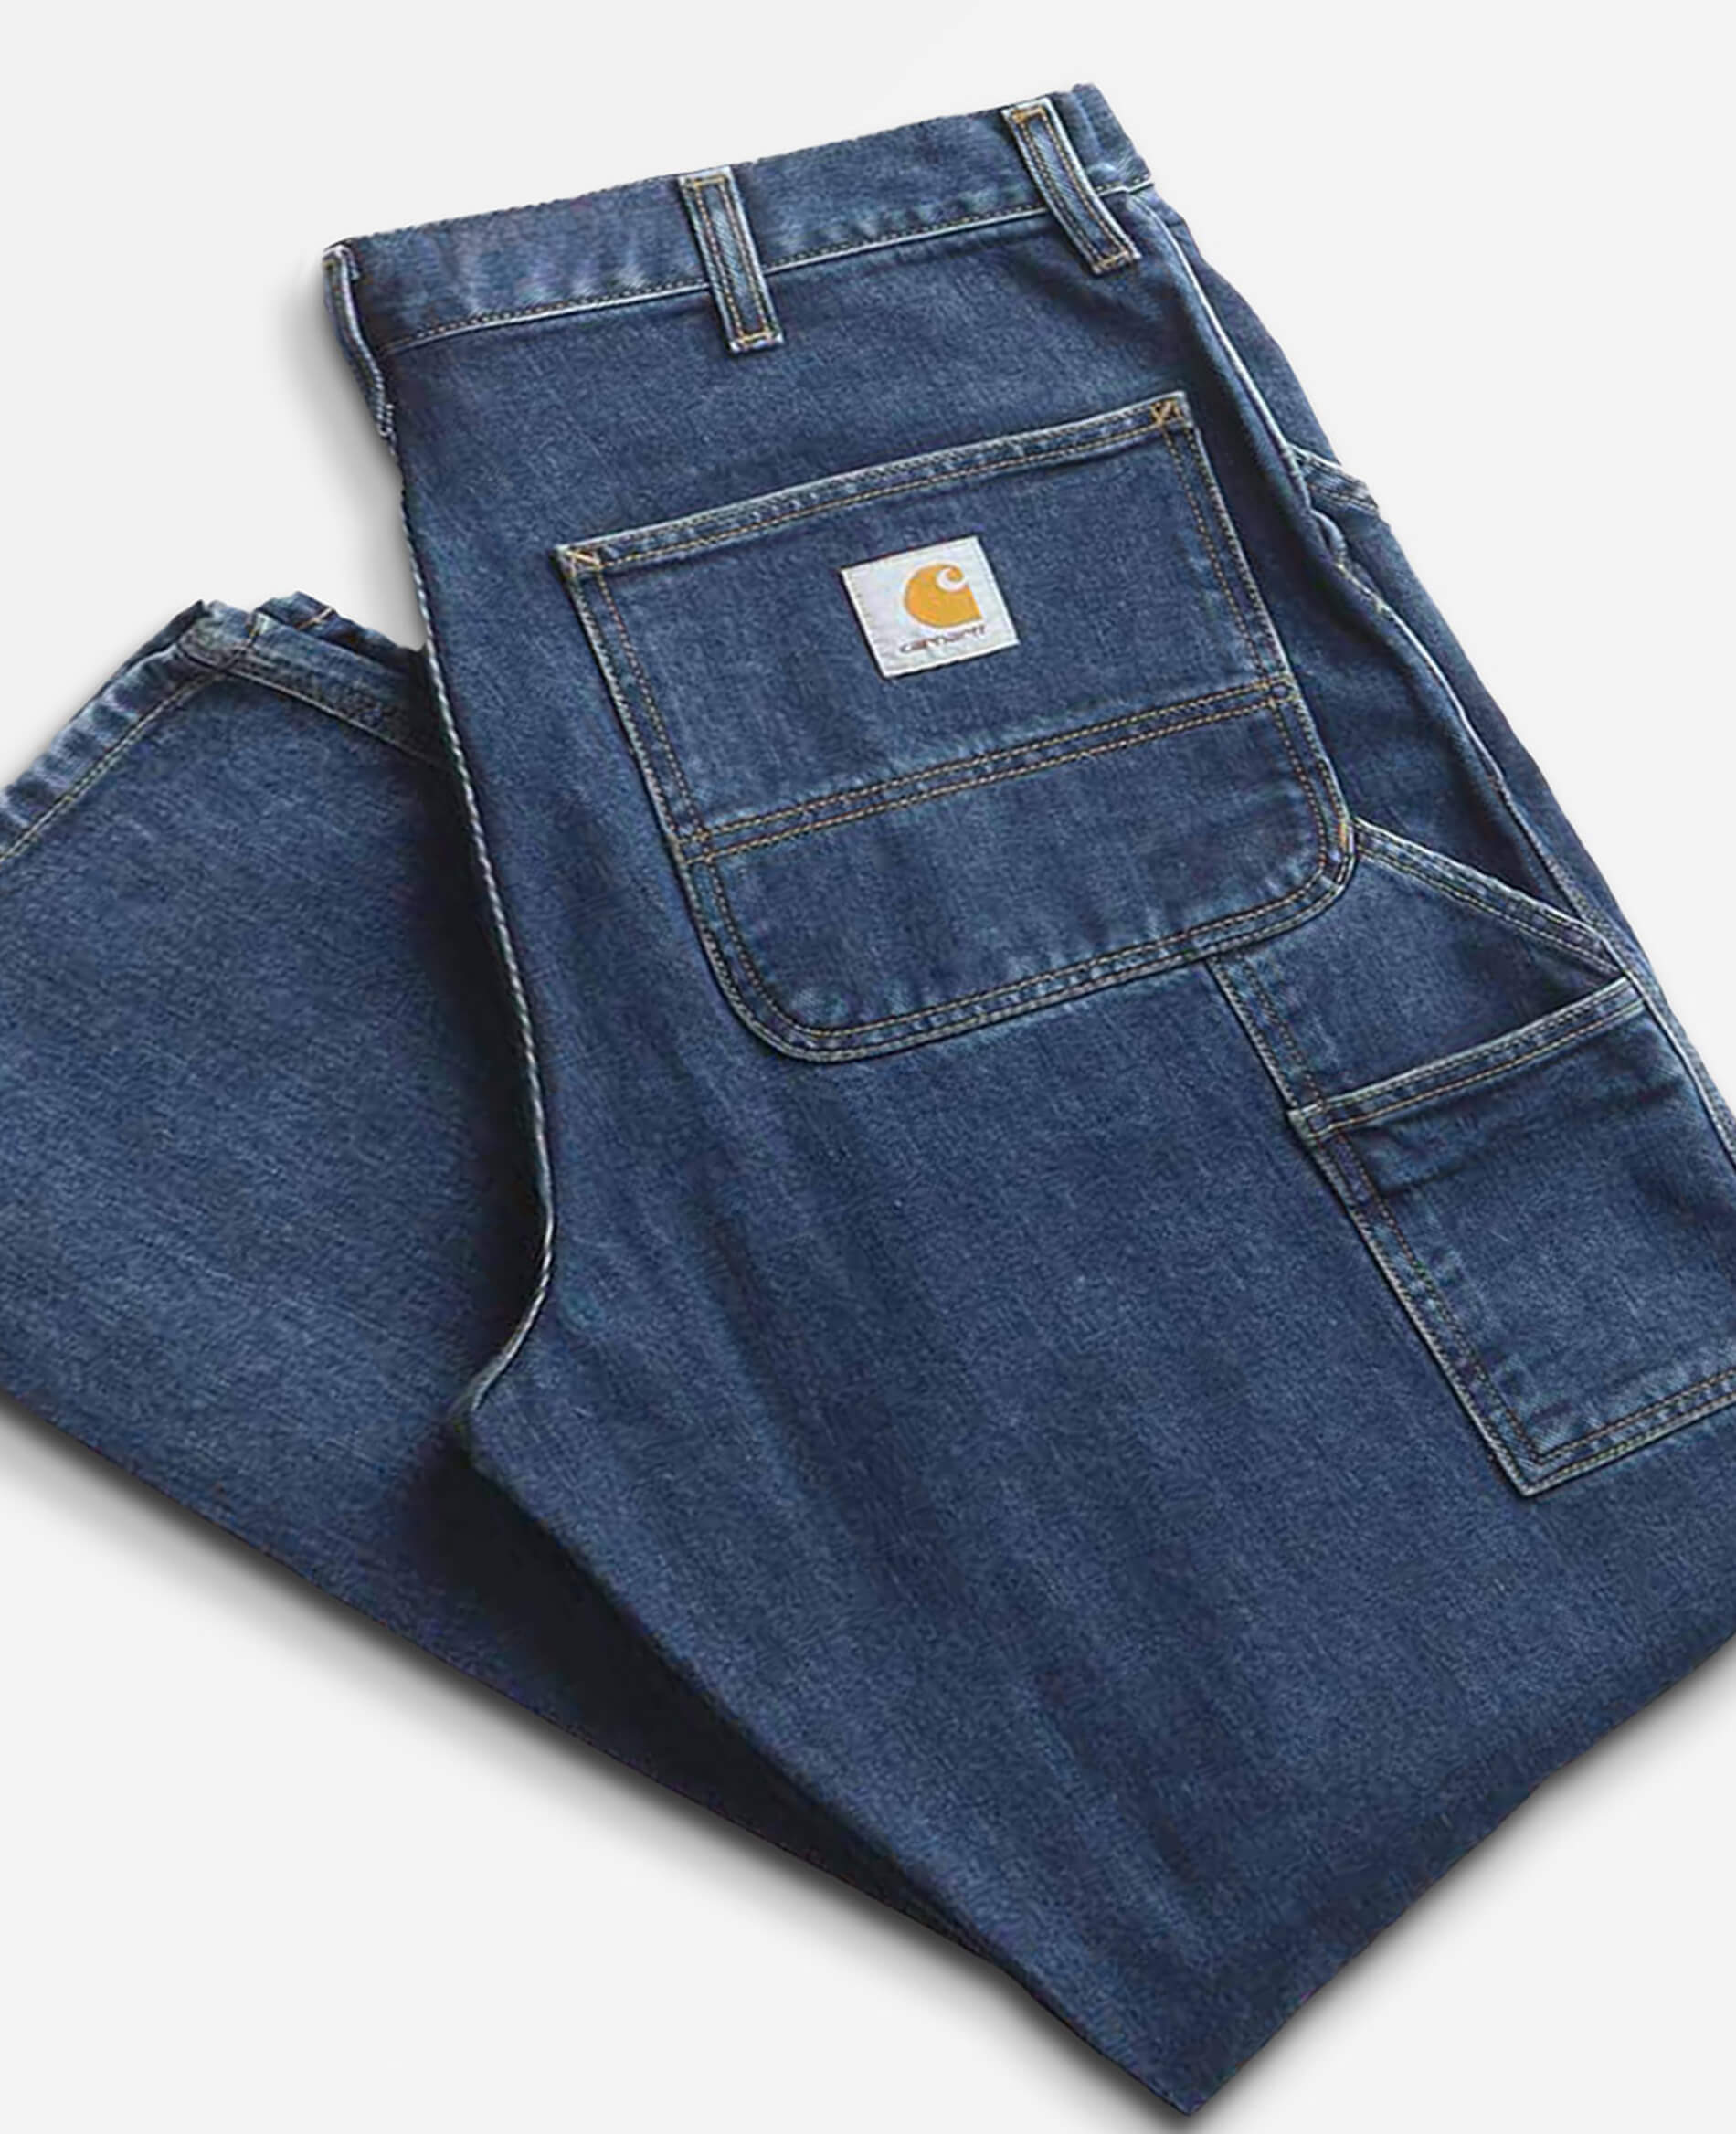 Carhartt work jeans: Tough, Timeless, and Fashion Styles插图4